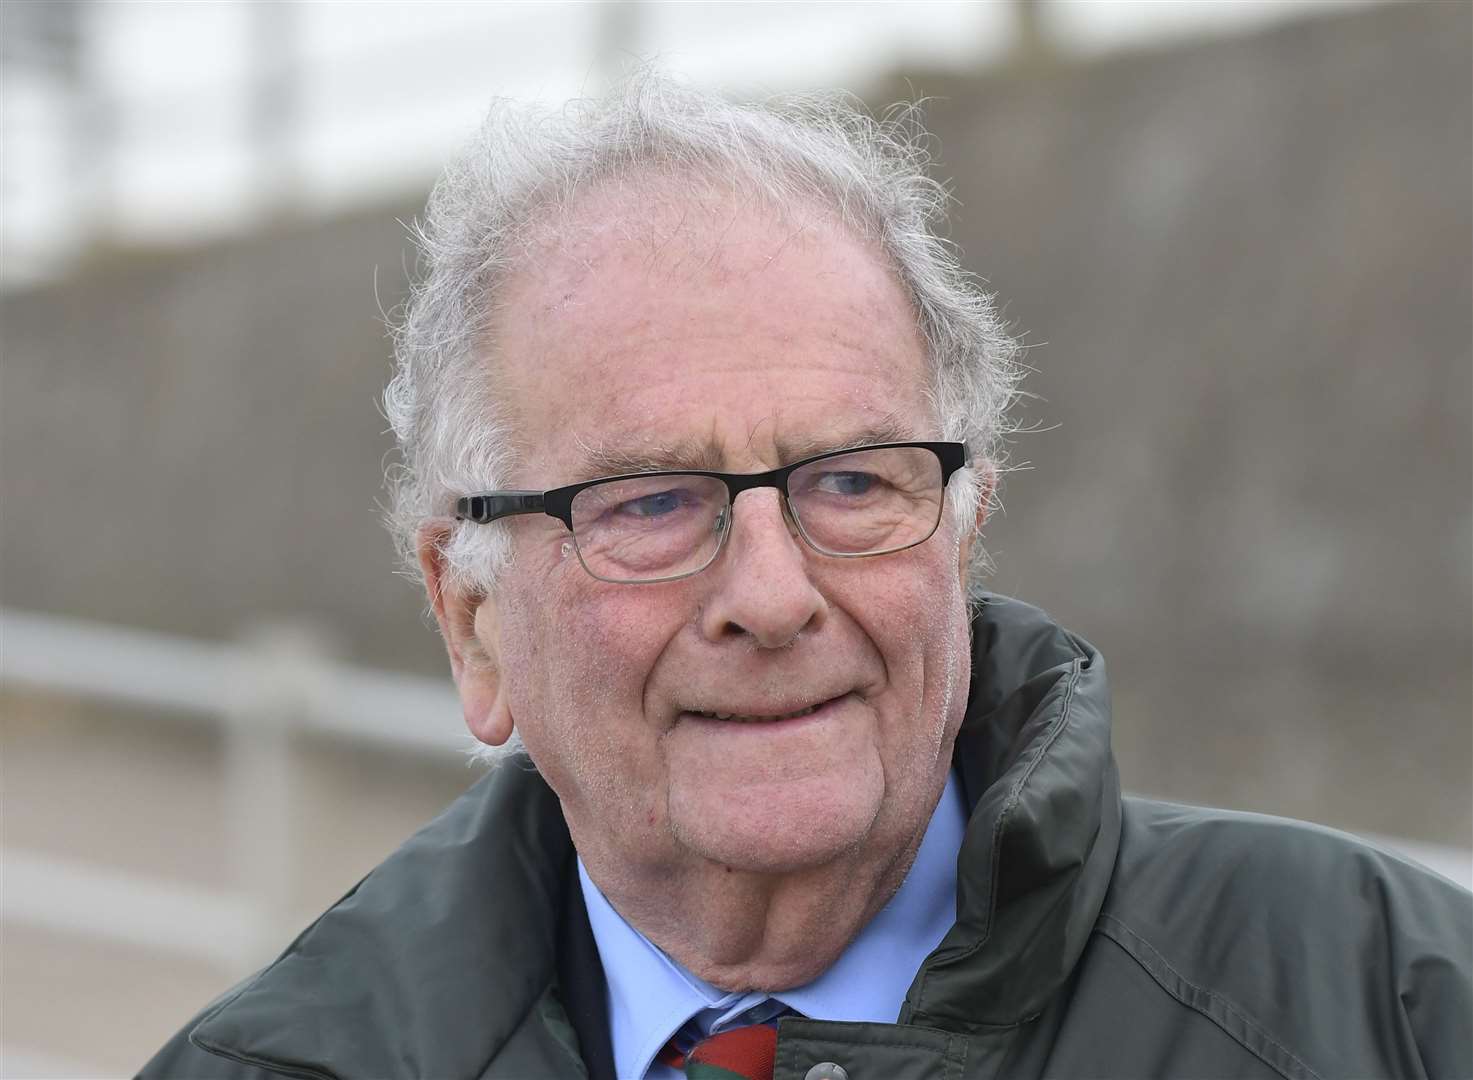 Sir Roger Gale was amongst the many people to question the government's policy over Christmas